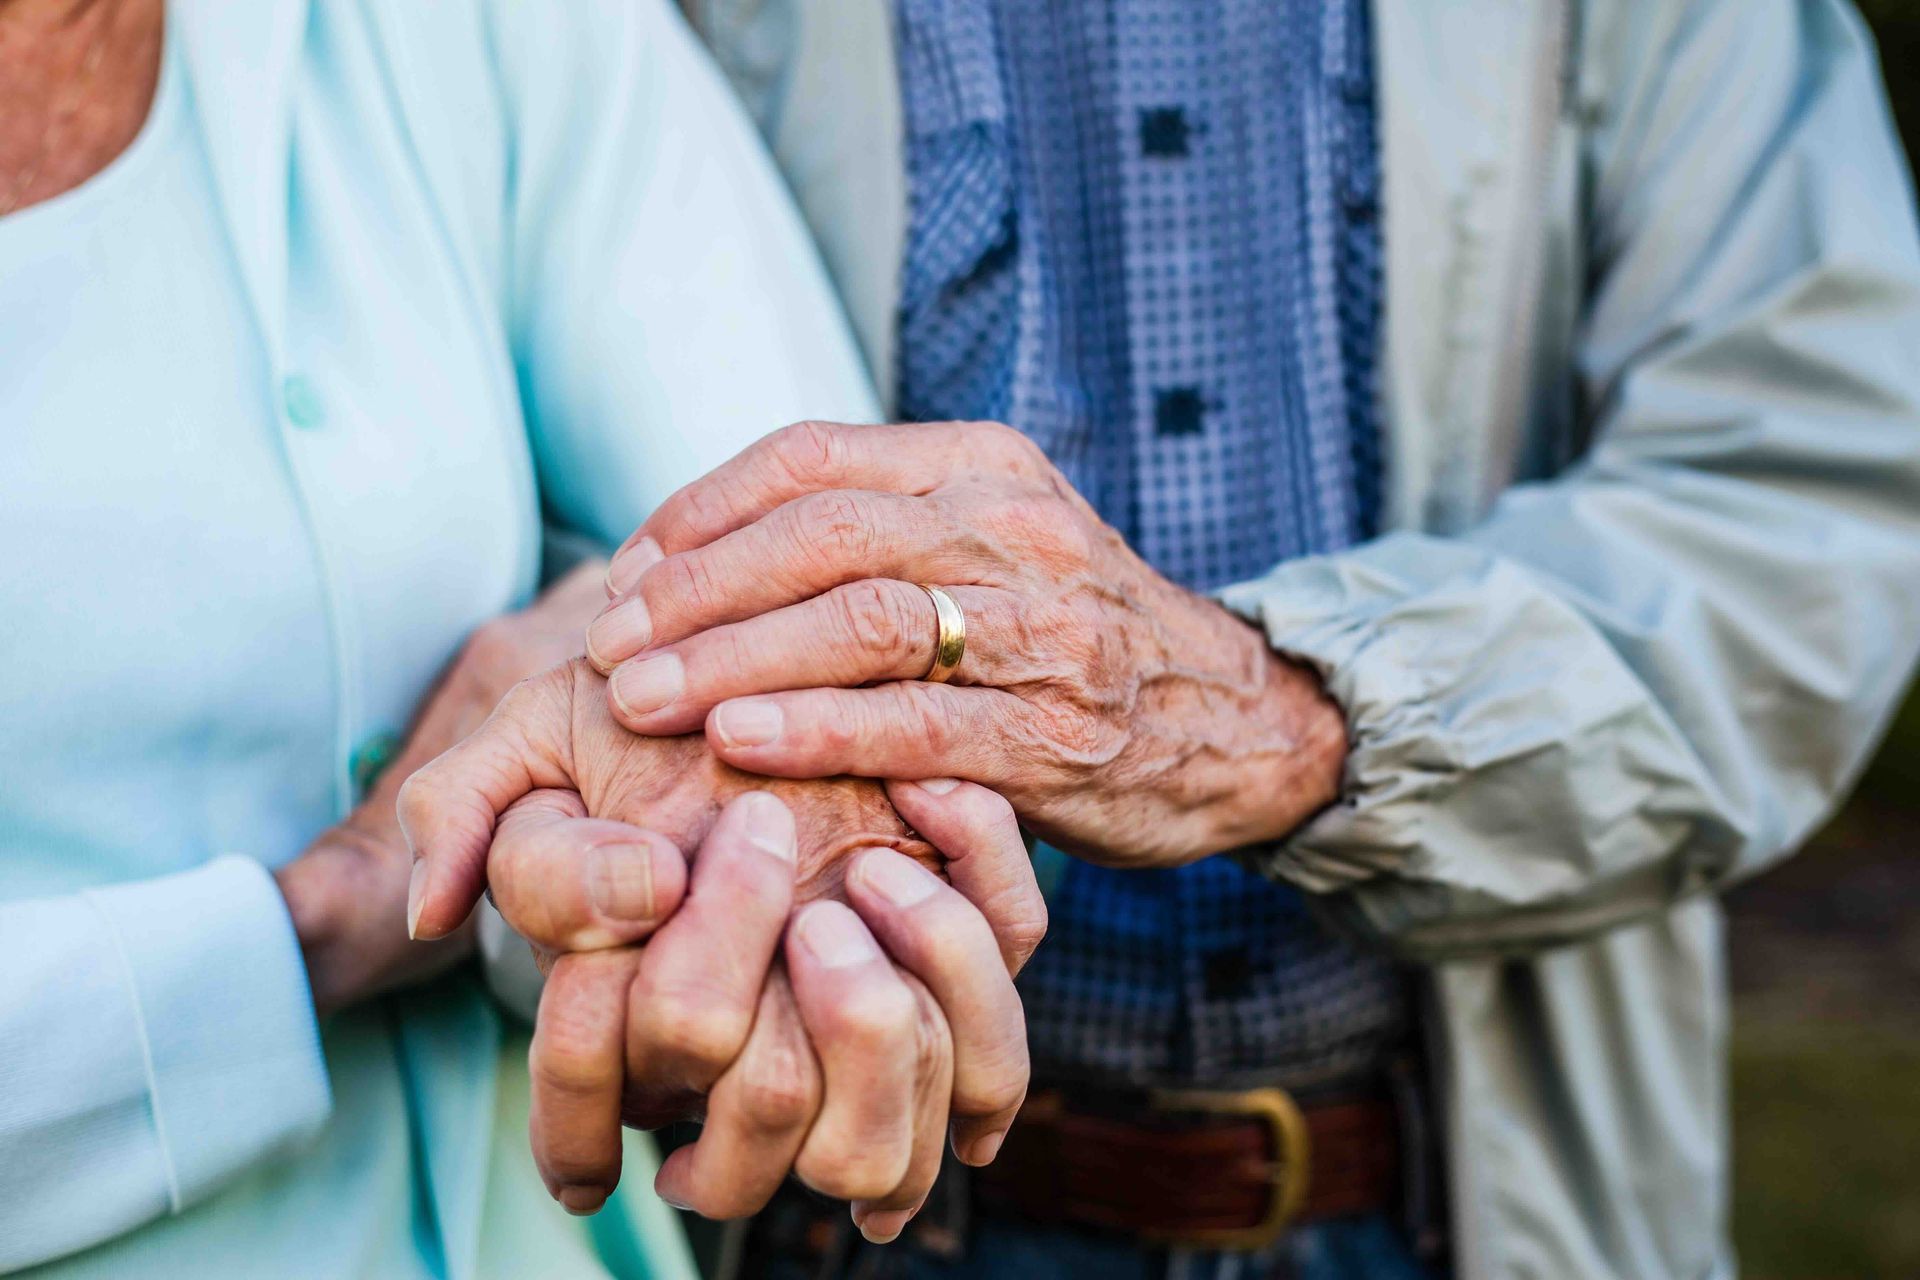 a man and a woman are holding hands and the man has a wedding ring on his finger .